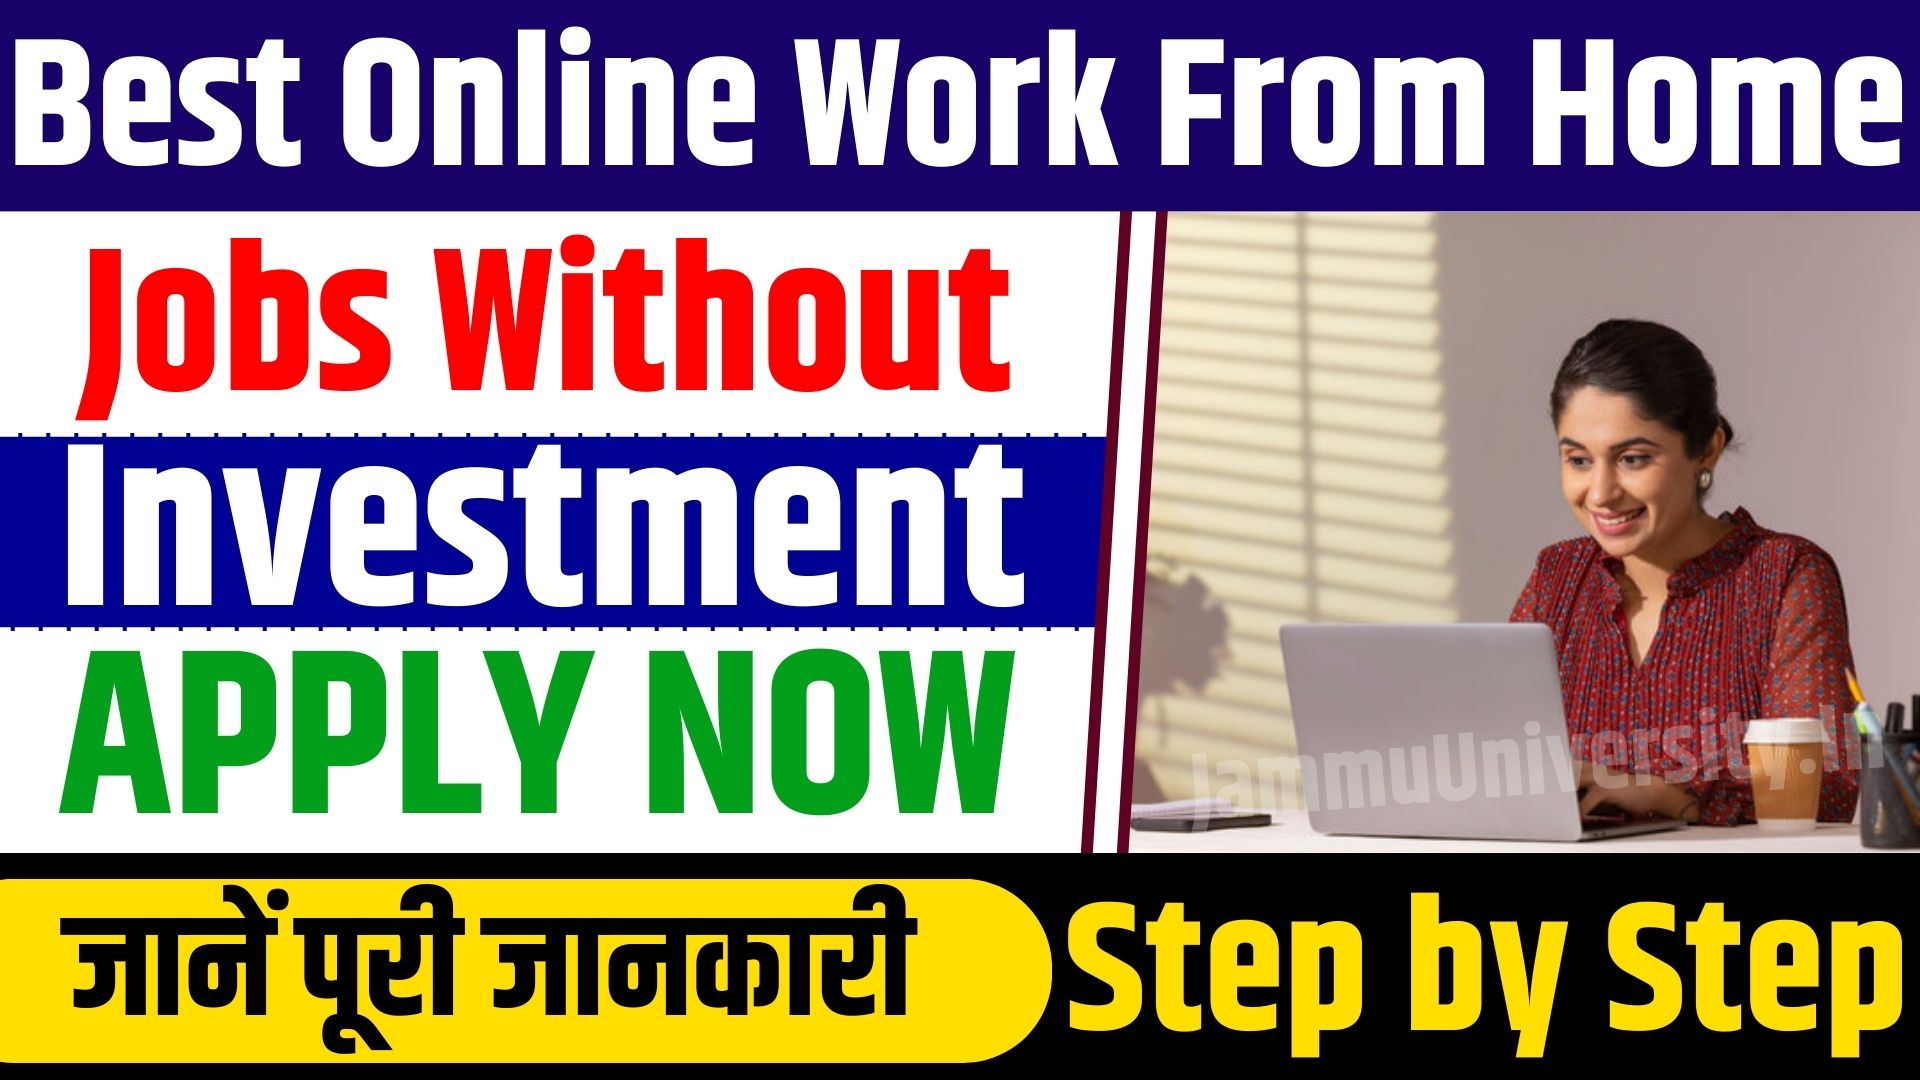 Best Online Work From Home Jobs Without Investment